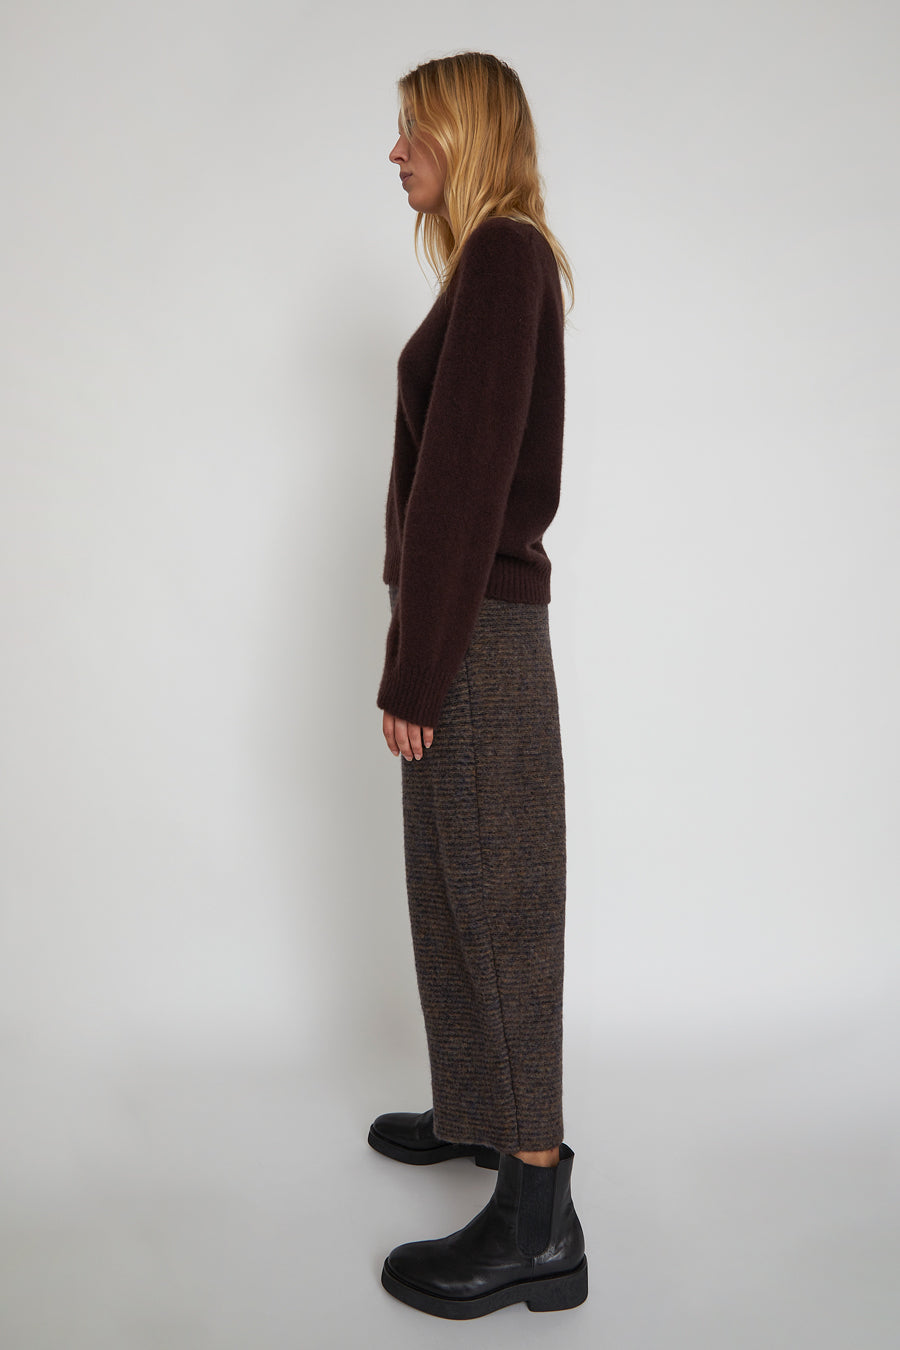 Boboutic Il Feltro Pant in Mix Brown and Blue